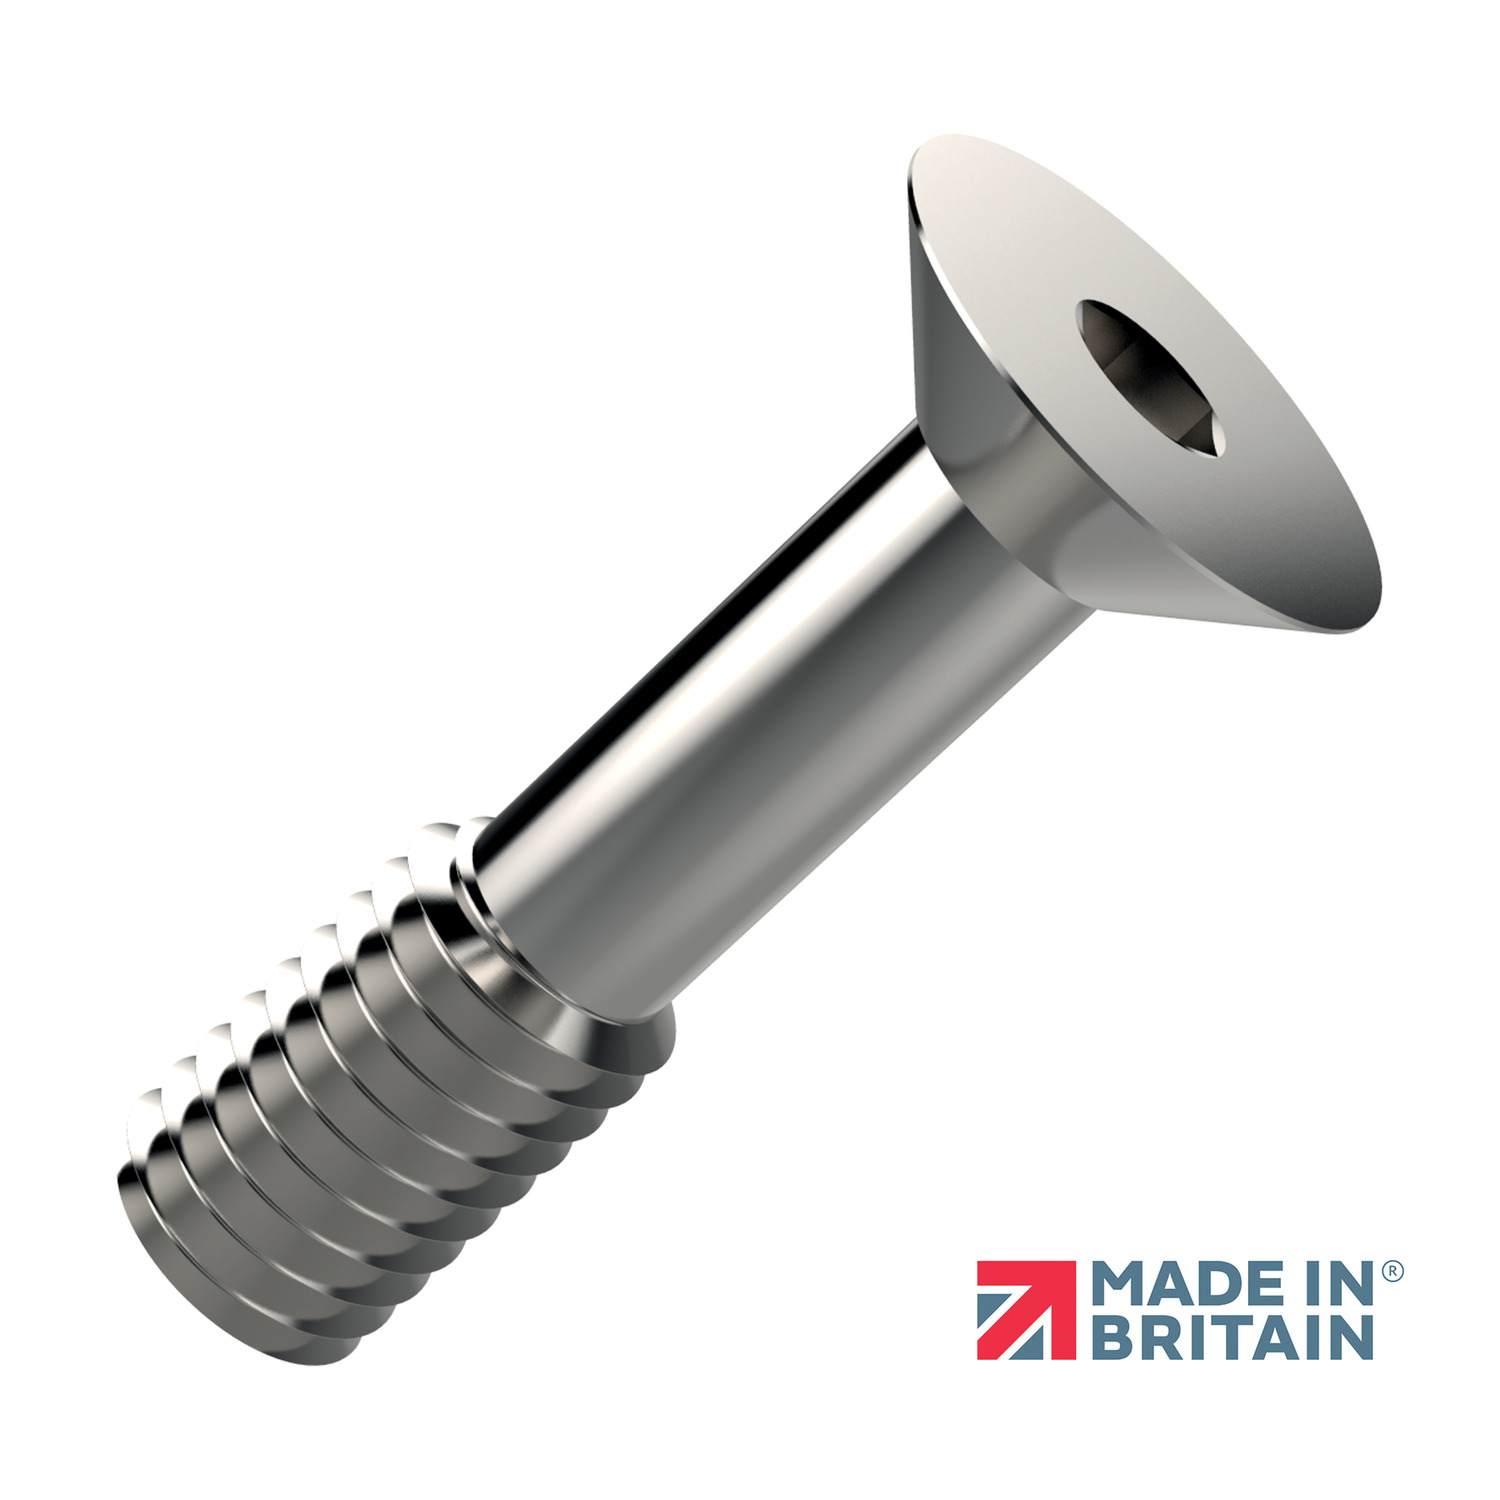 Captive Screws - Countersunk Countersunk hex socket is featured in the 36684 captive screw generally to DIN 7991.